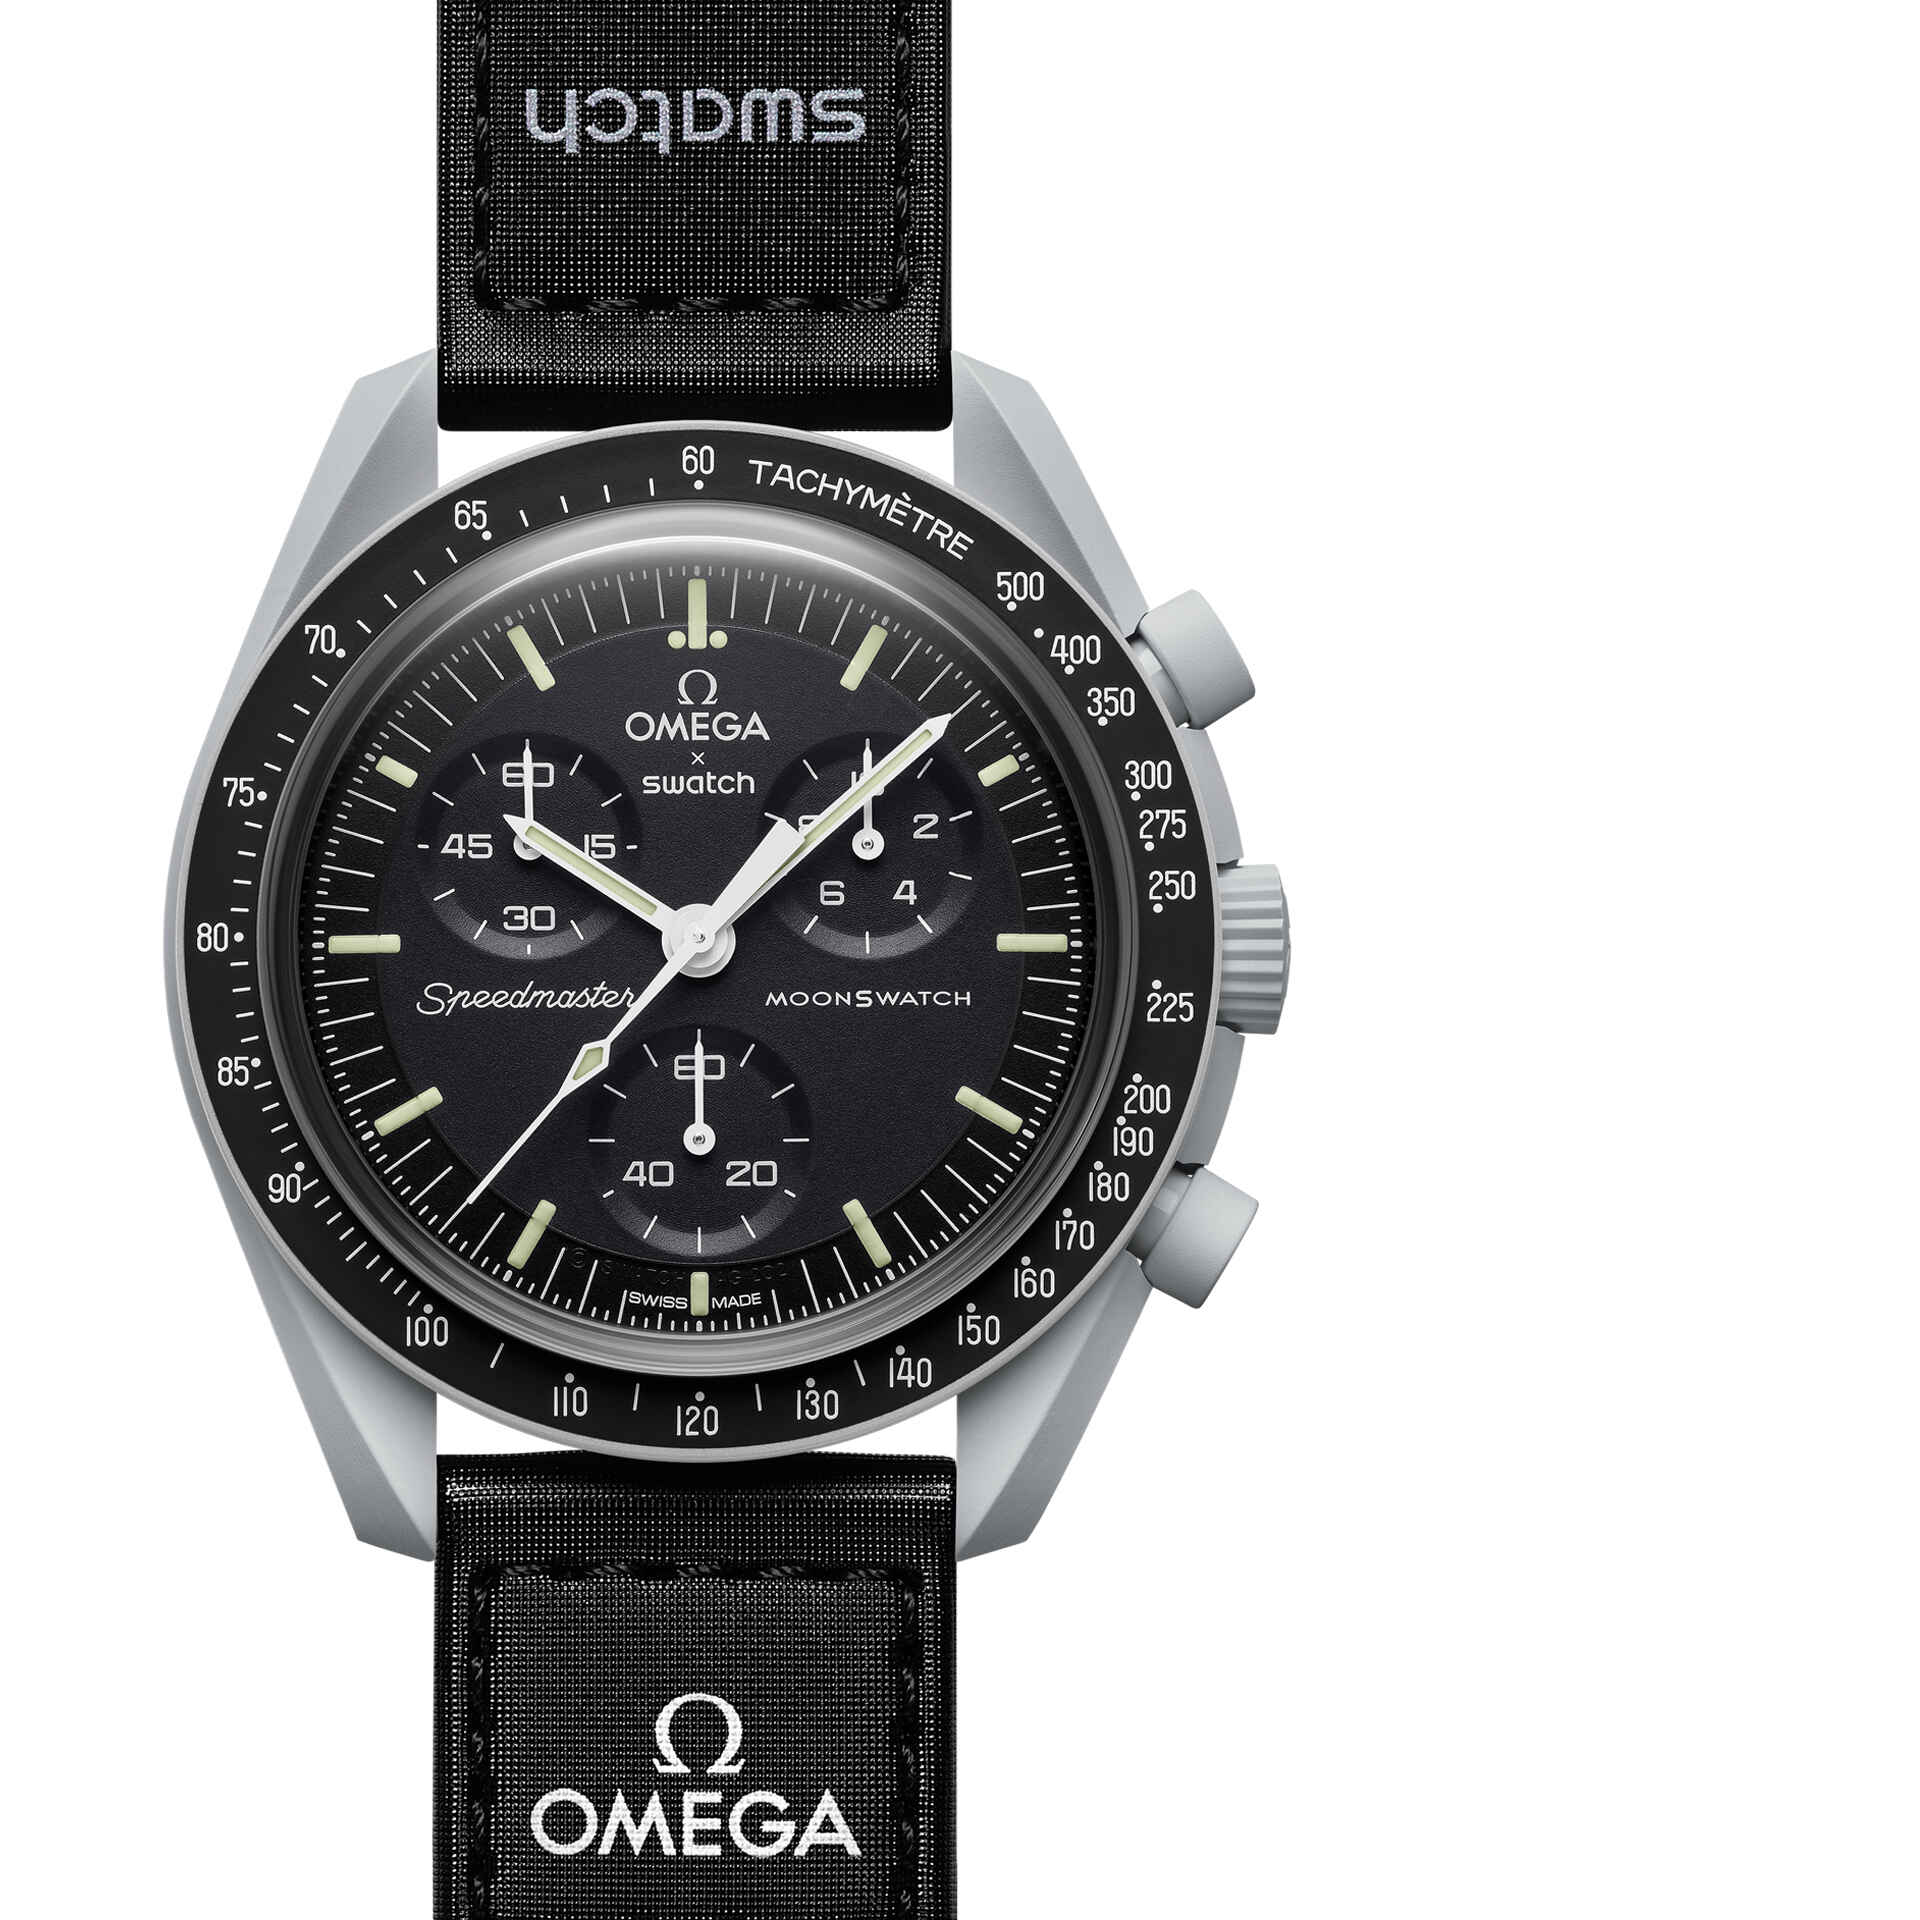 Omega x Swatch Speedmaster "Moonswatch" - Mission to the Moon